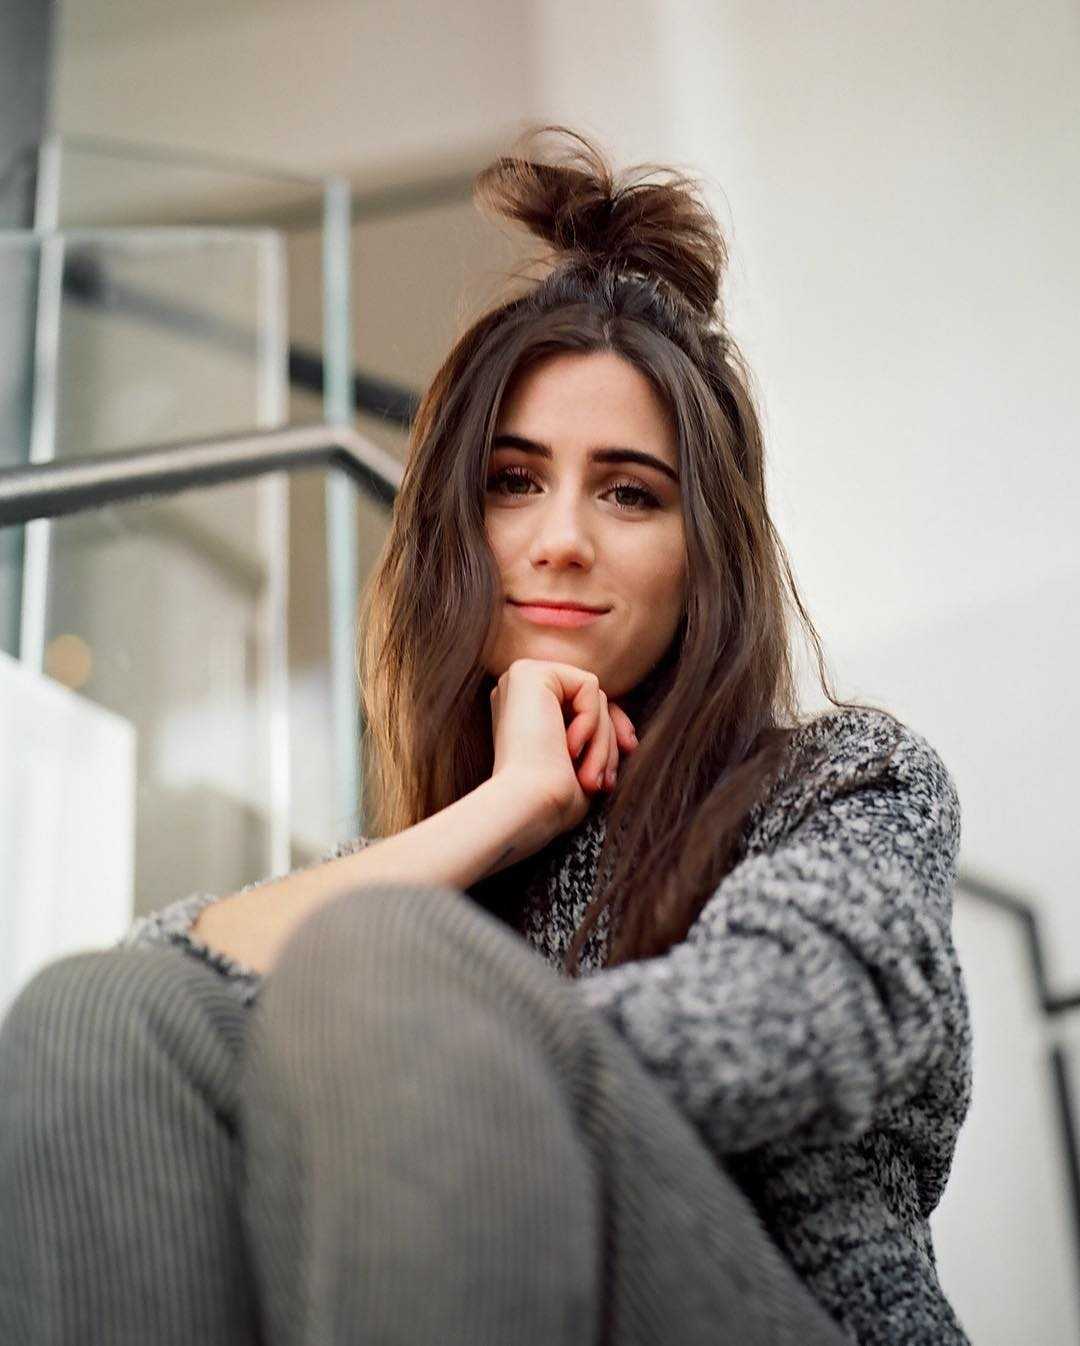 51 Hottest Dodie Big Butt Pictures Demonstrate That She Has Most Sweltering Legs 606